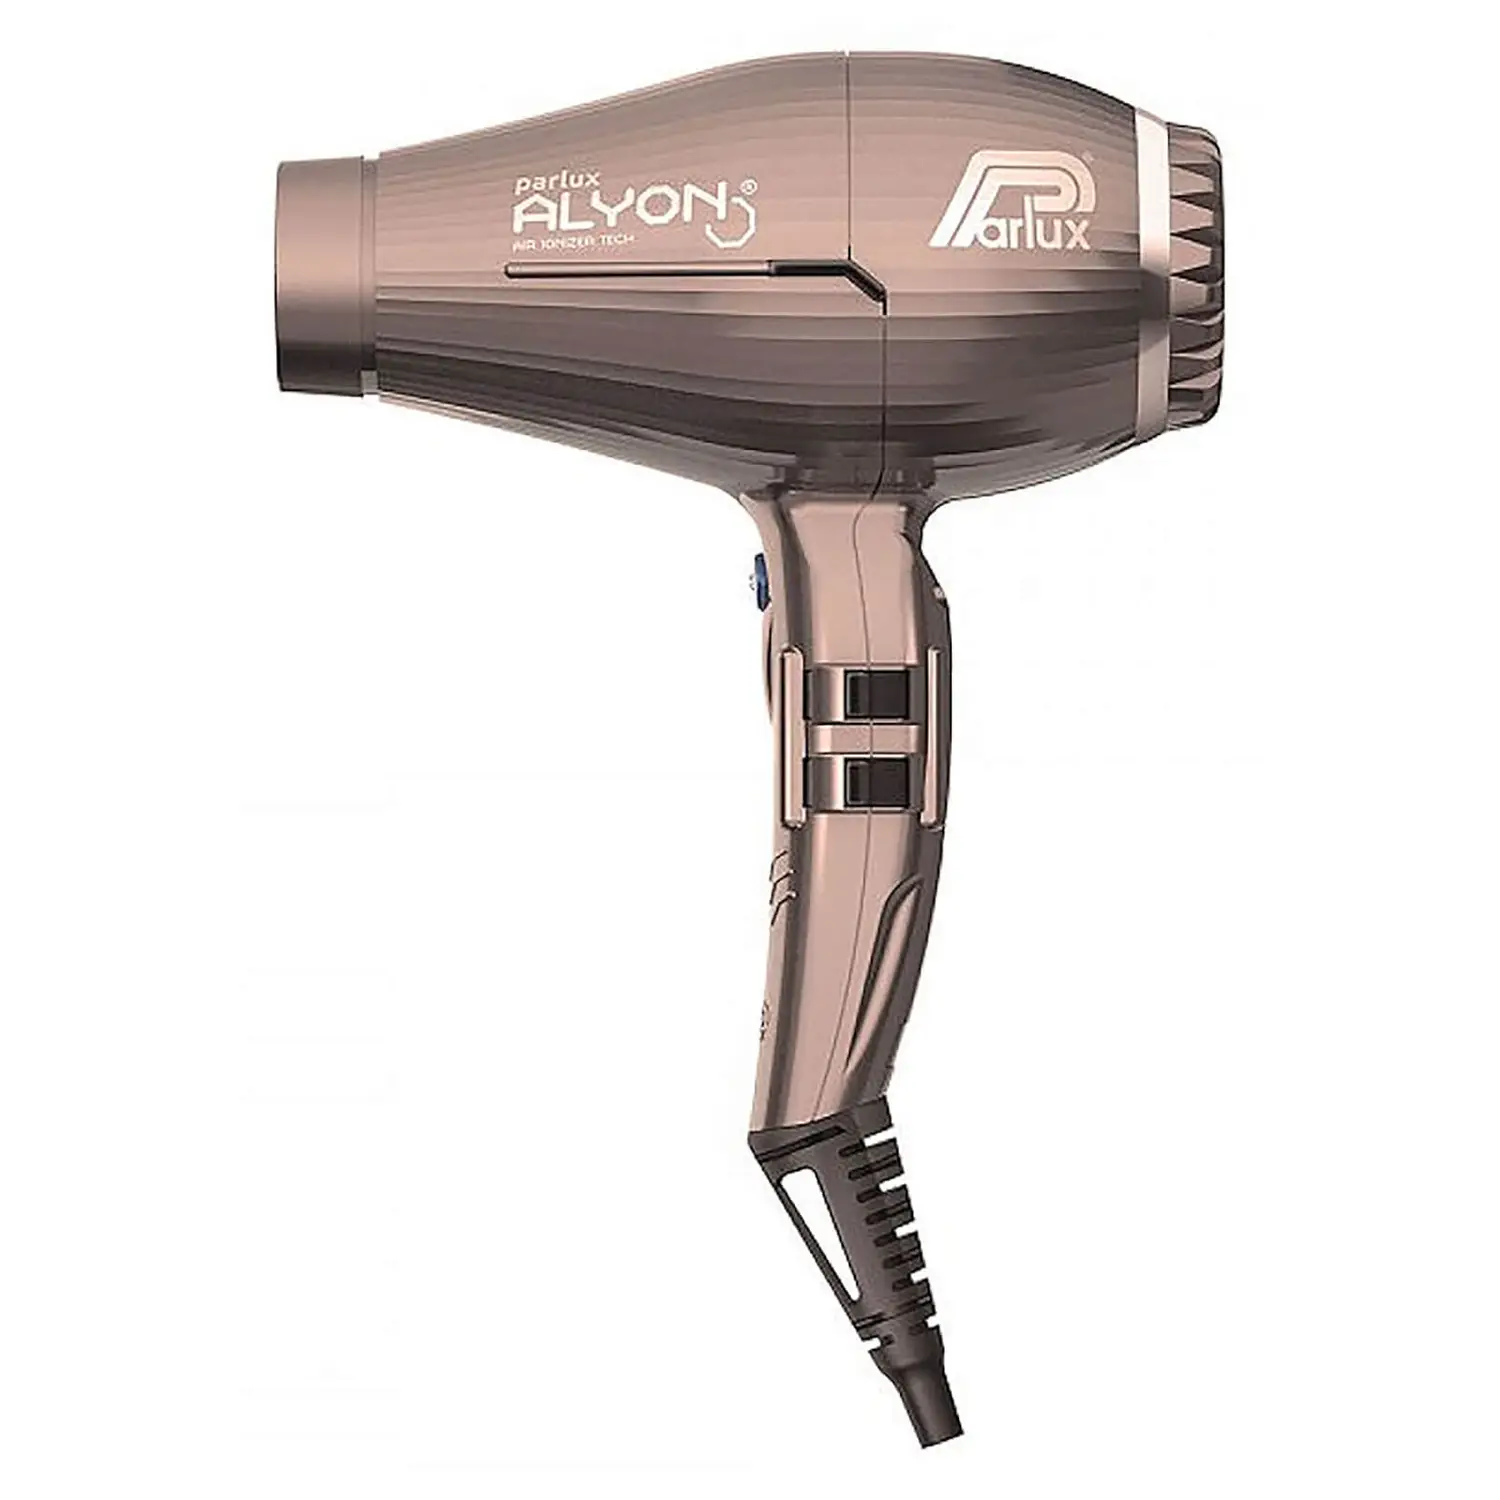 A Parlux Alyon hair dryer on a white background.